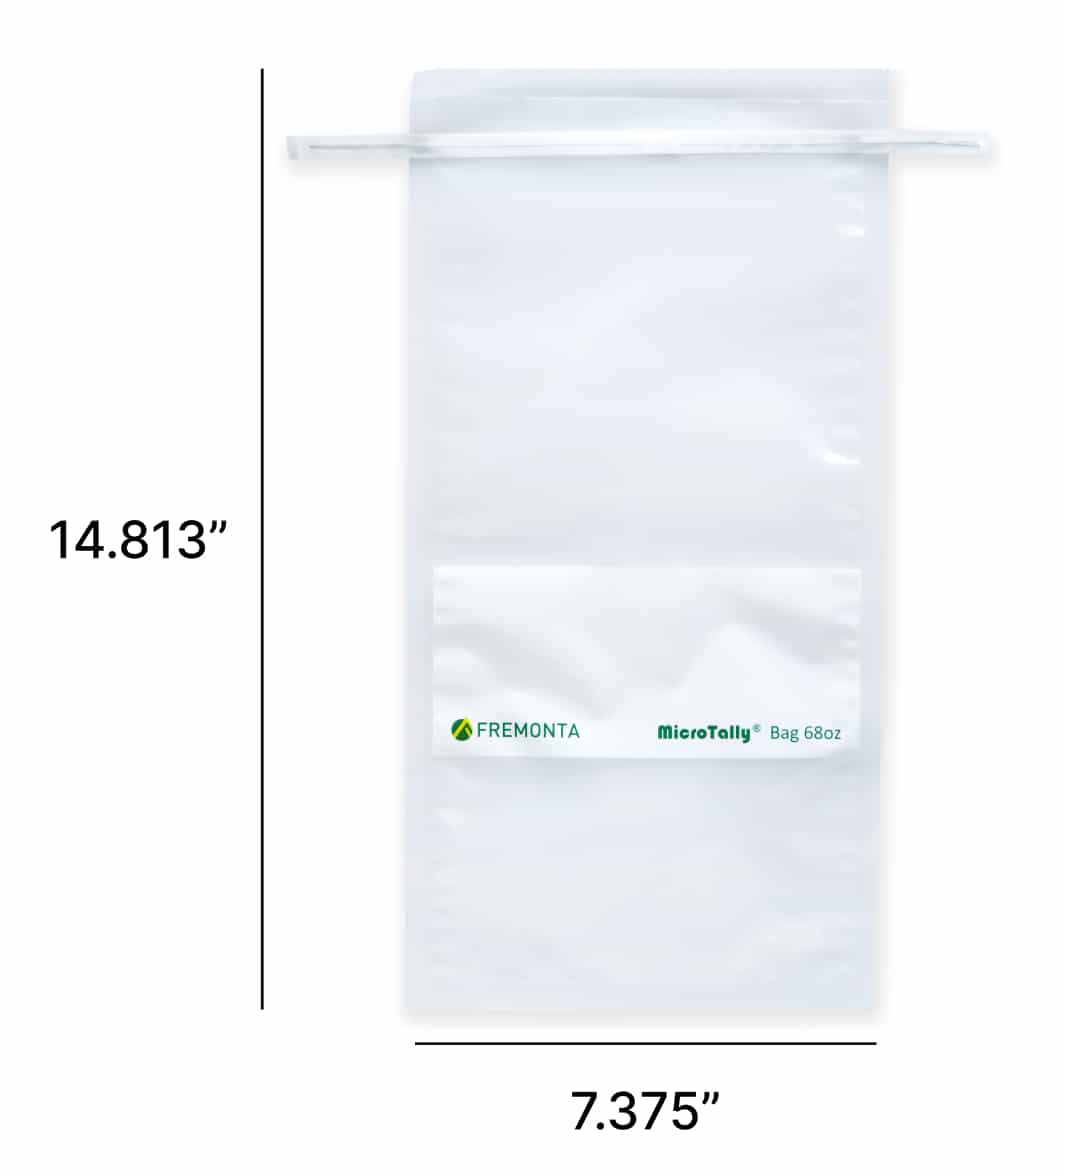 MT Filter Bags 68oz - MicroTally